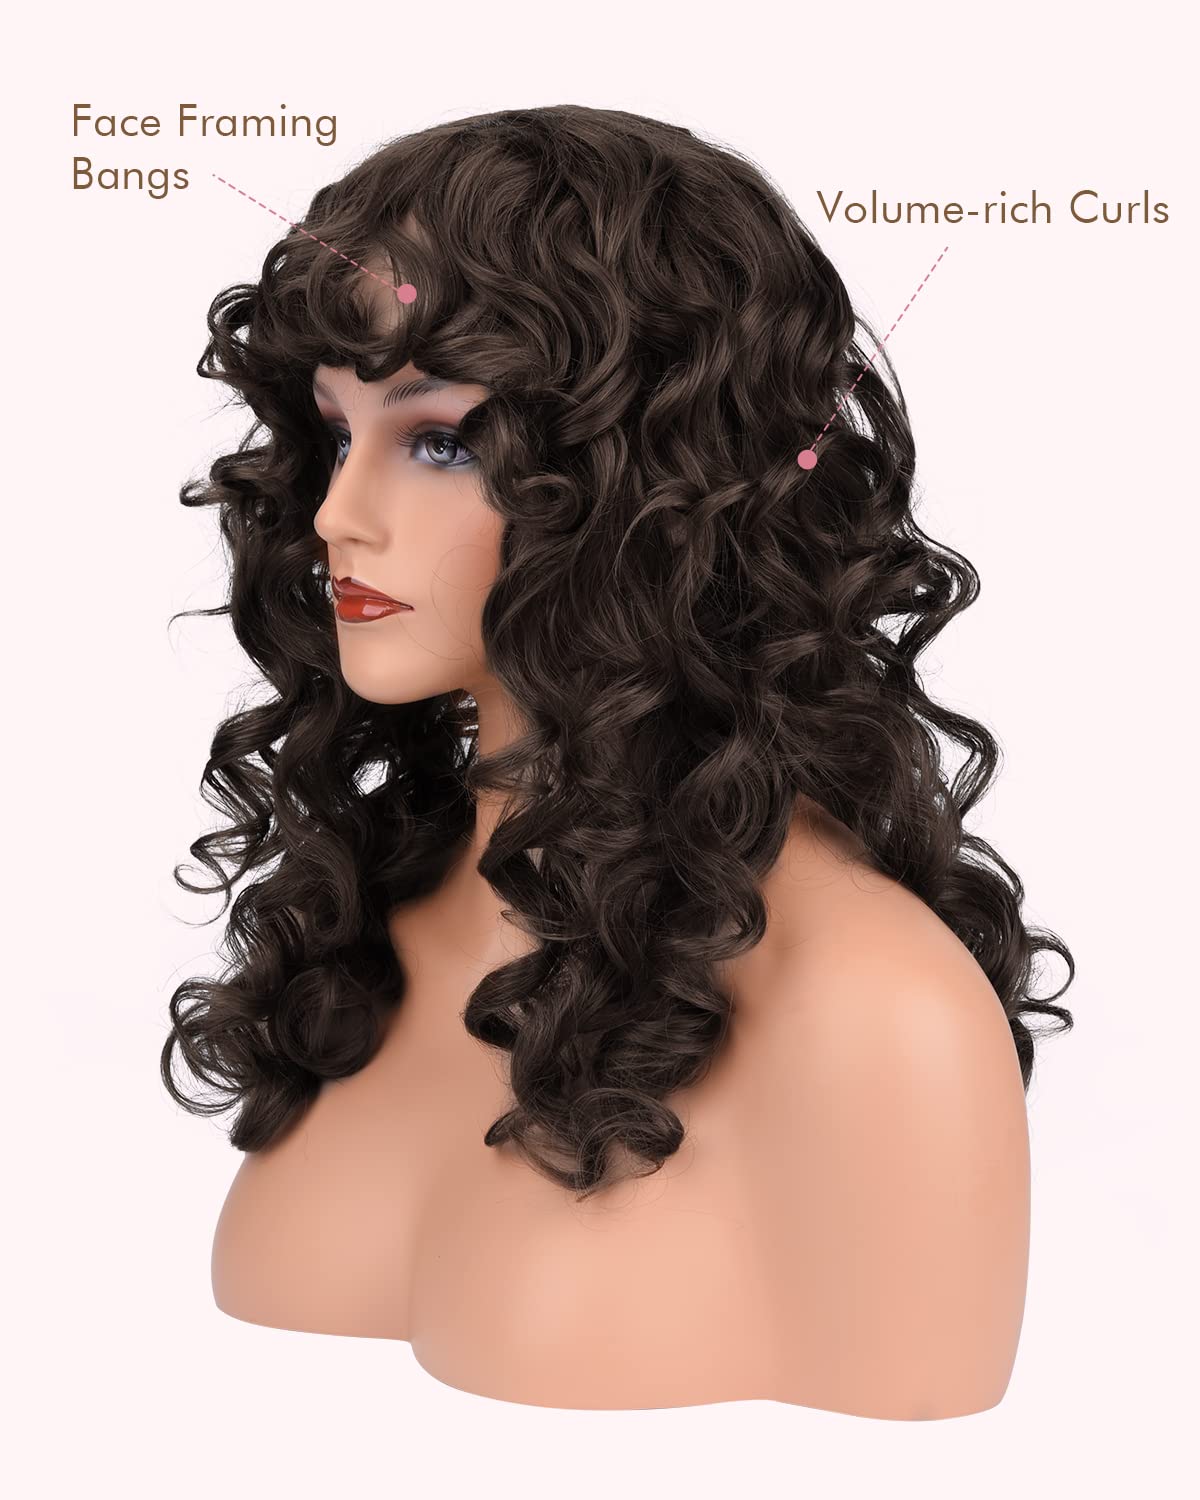 REECHO Curly Wig with Bangs, Curly Shag Hair Cut Hair Style for Women